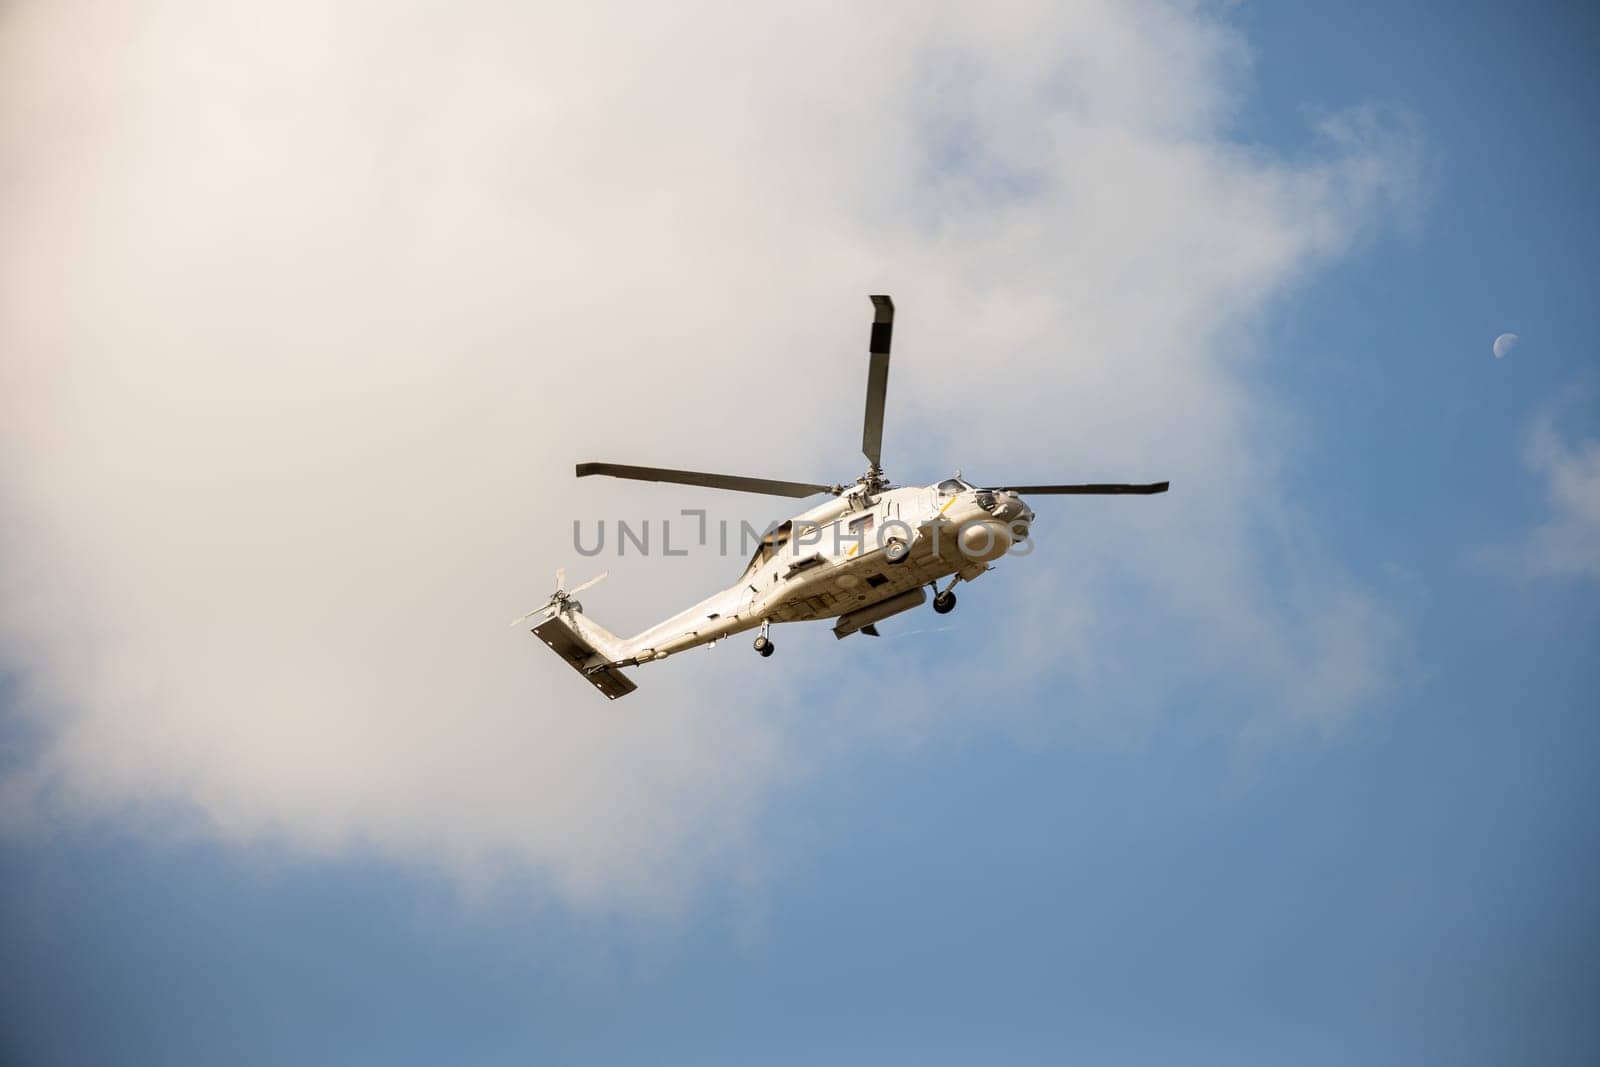 Modern helicopter in flight against blue sky. New engine technology for rescue and transport. Pilot maneuvers small aircraft with speed and precision showcasing hovering capability.